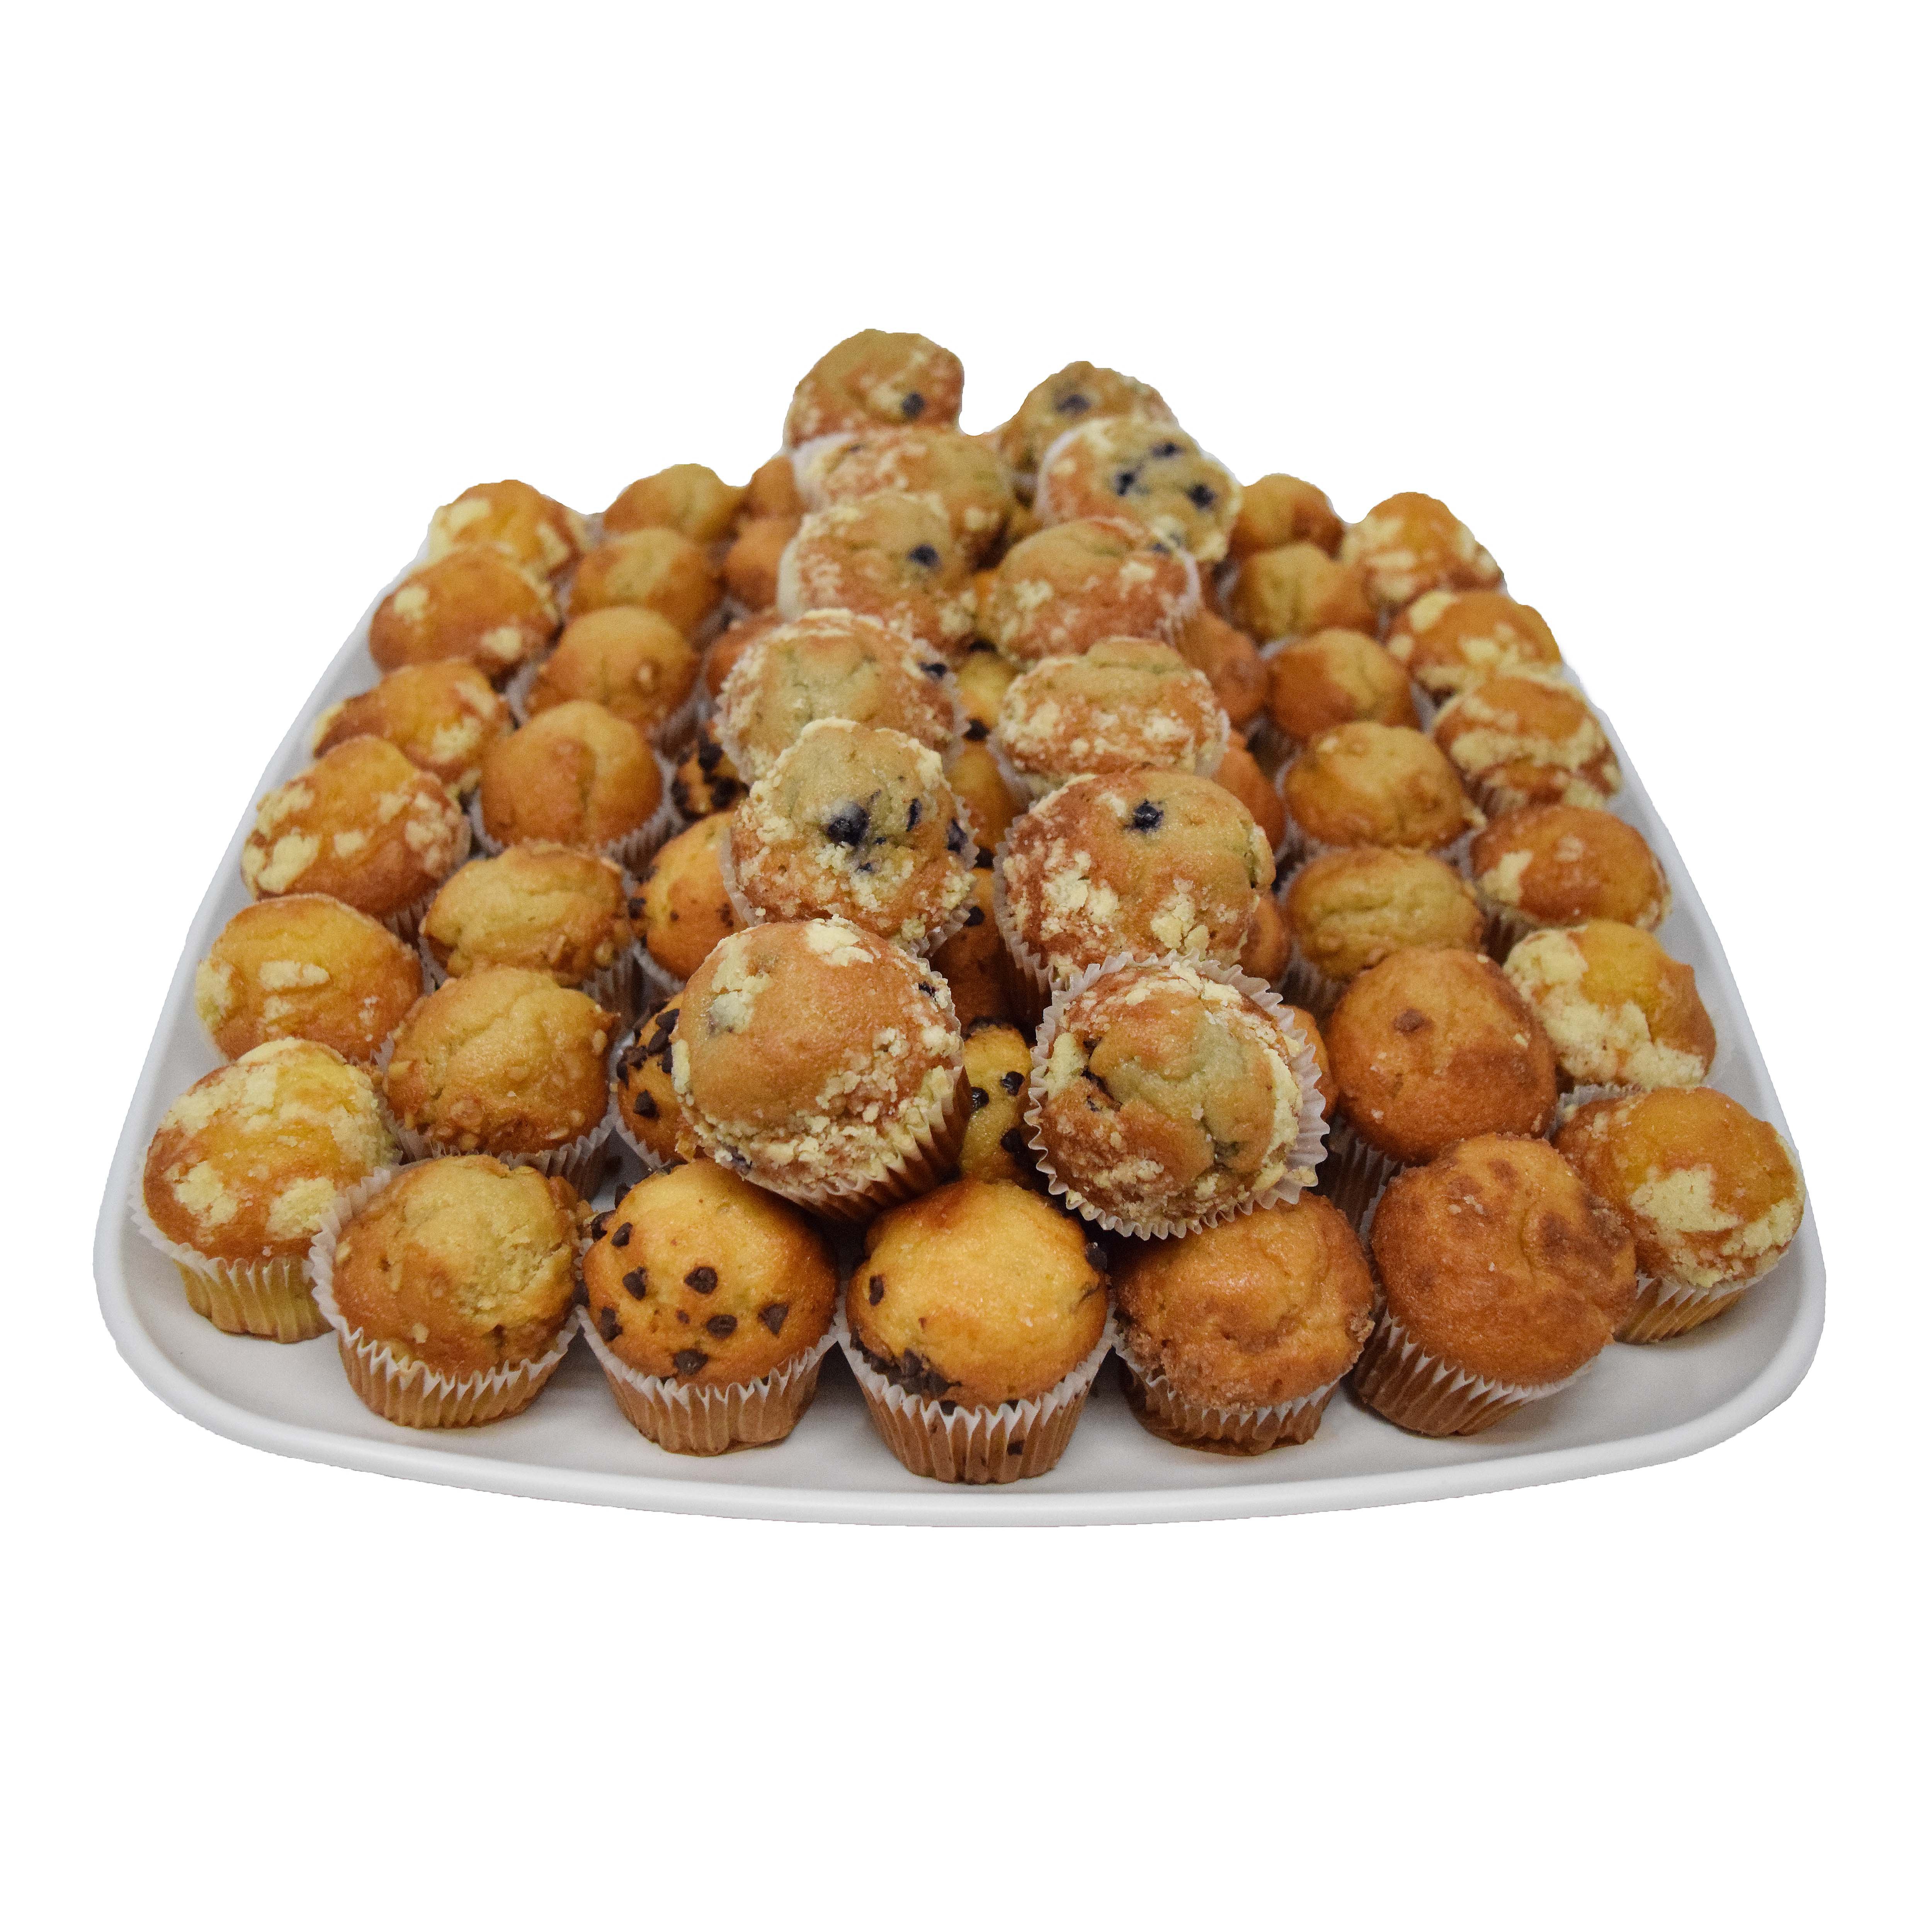 H-E-B Bakery Party Shop H-E-B Party at Tray - Mini Muffins Trays Standard 